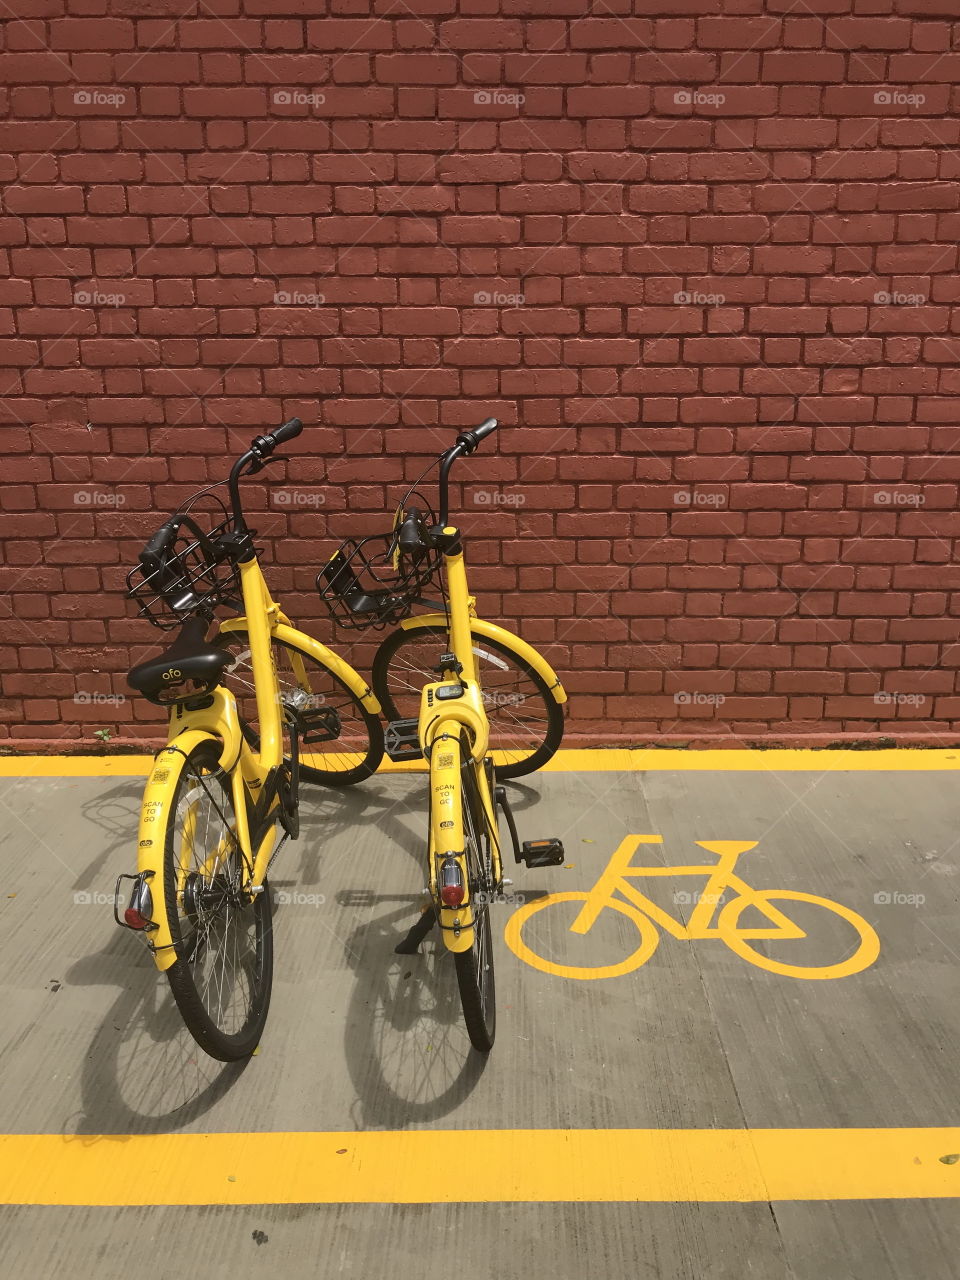 rental by application two of "ofo" brand bicycles parking in parking lot in front of Everton Park building, Singapore